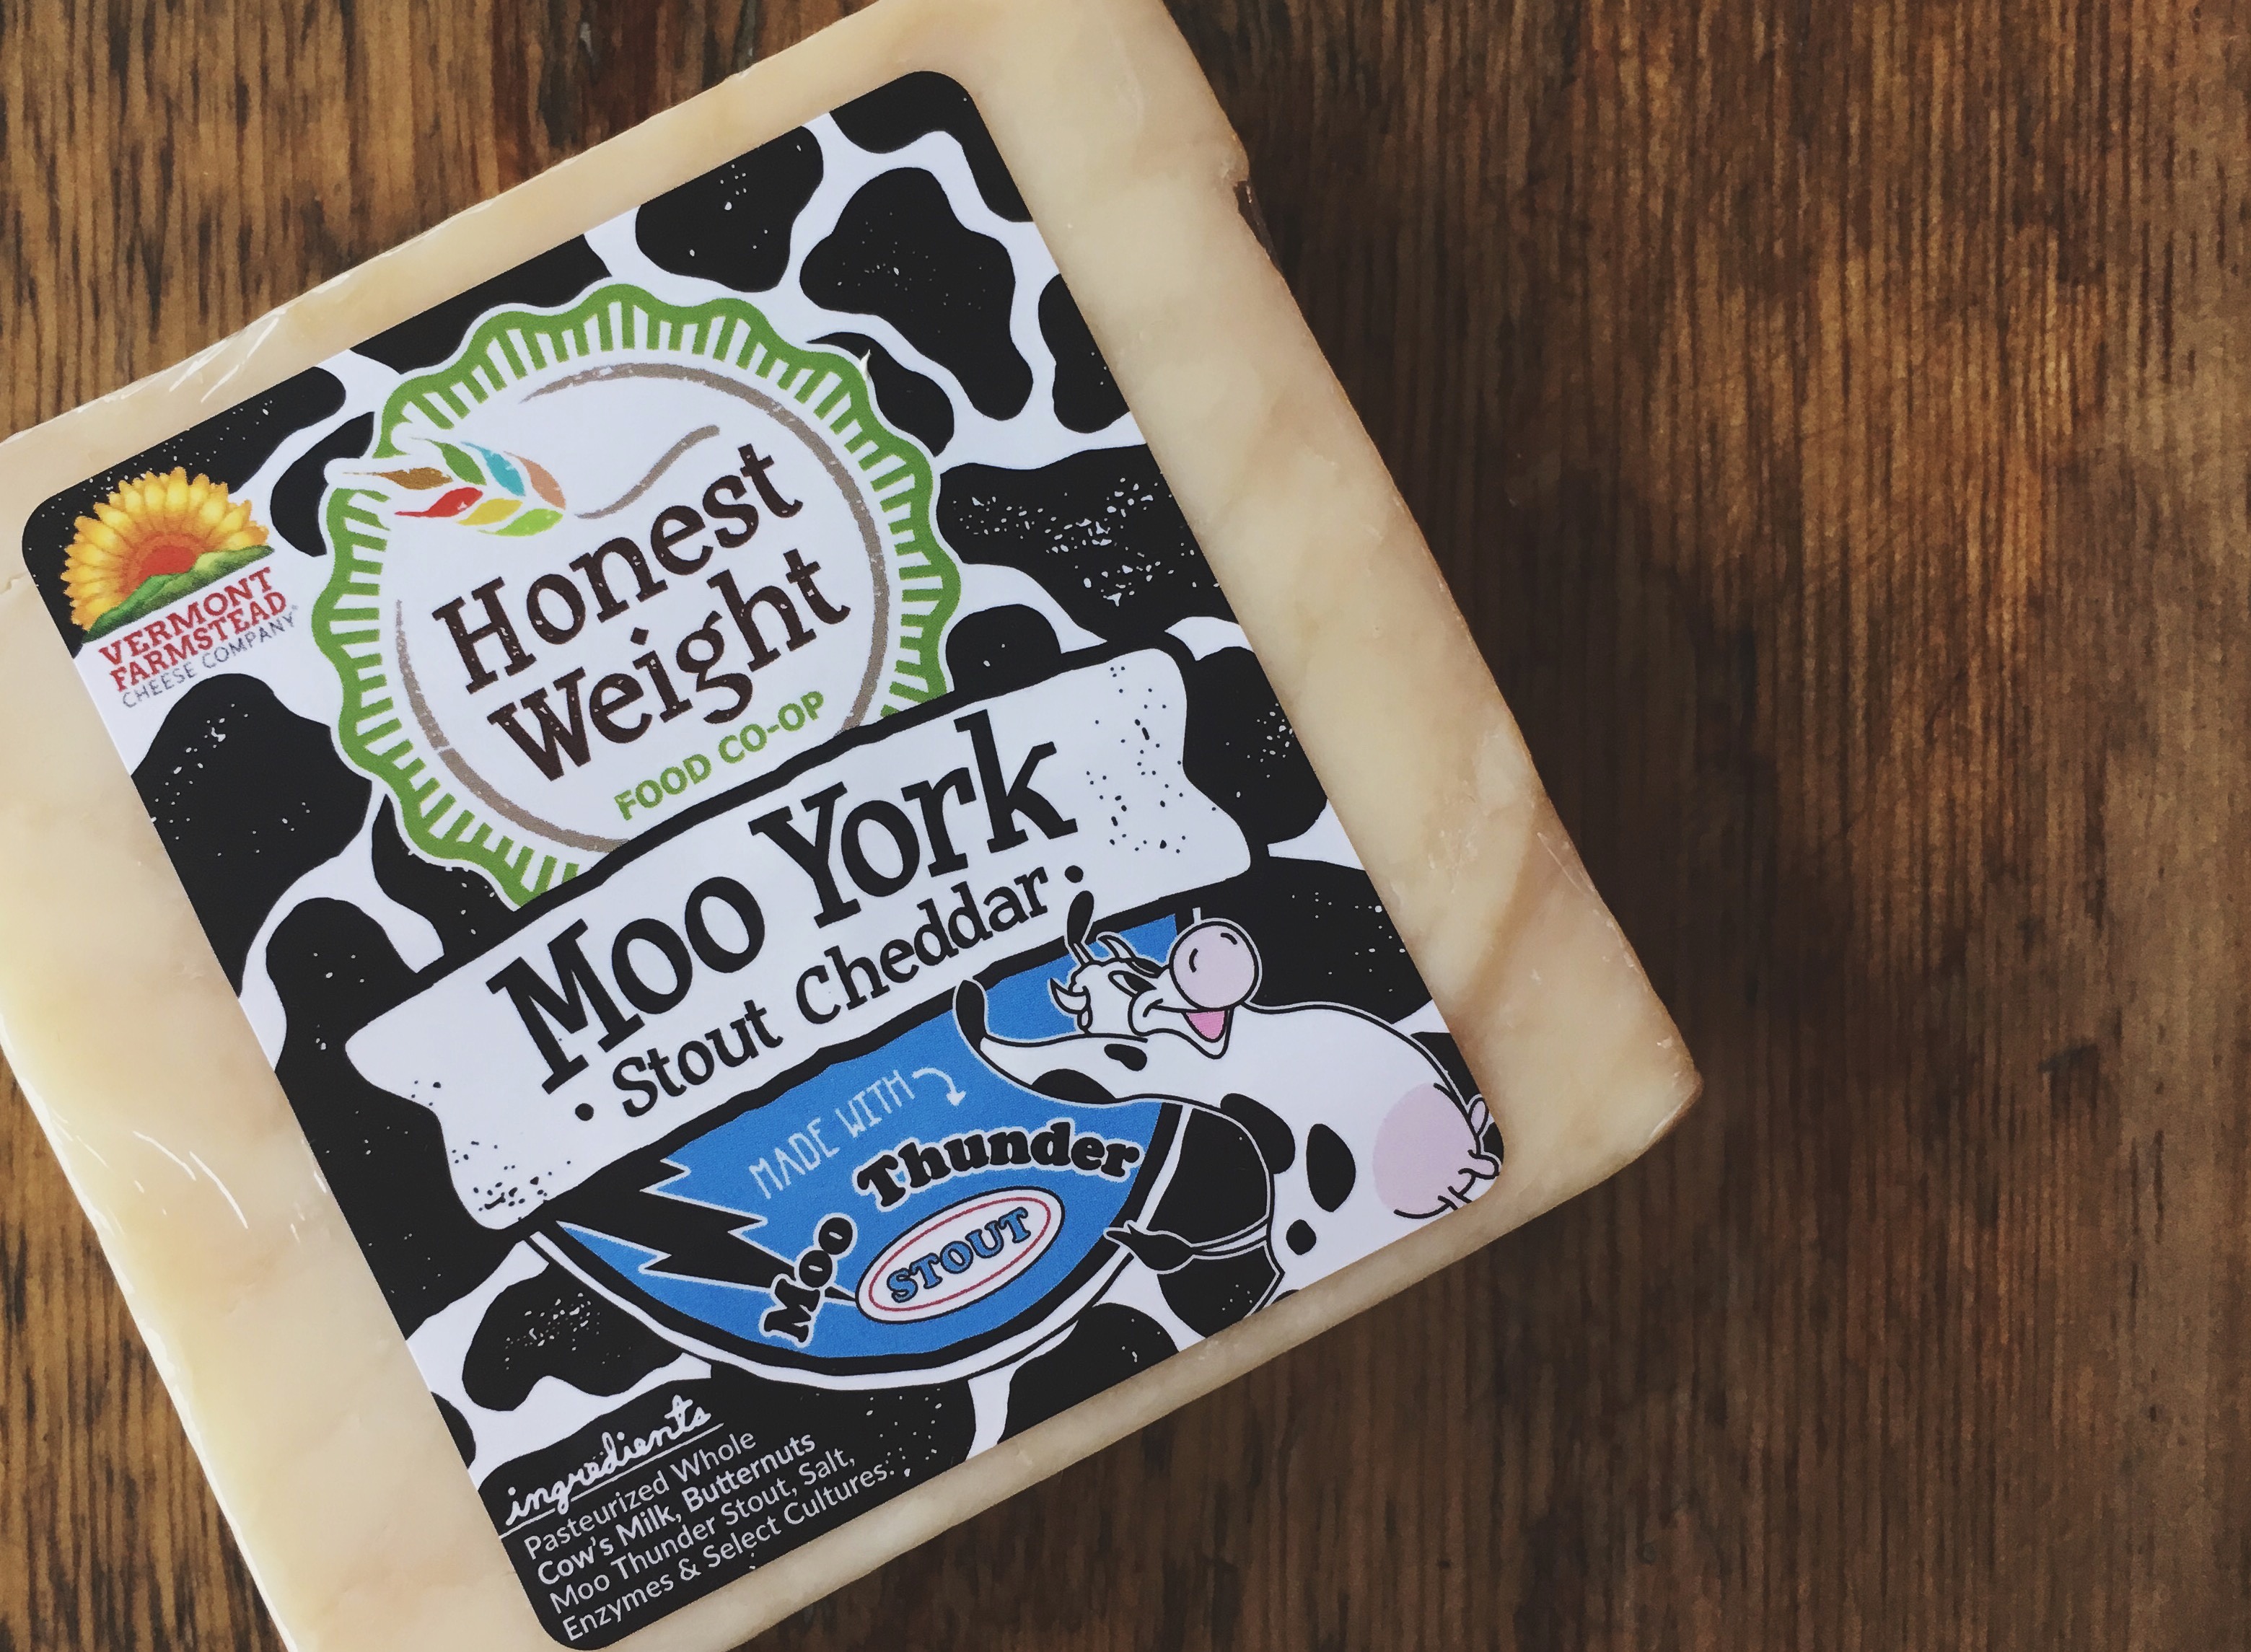 Honest Weight's Moo York Stout Cheddar